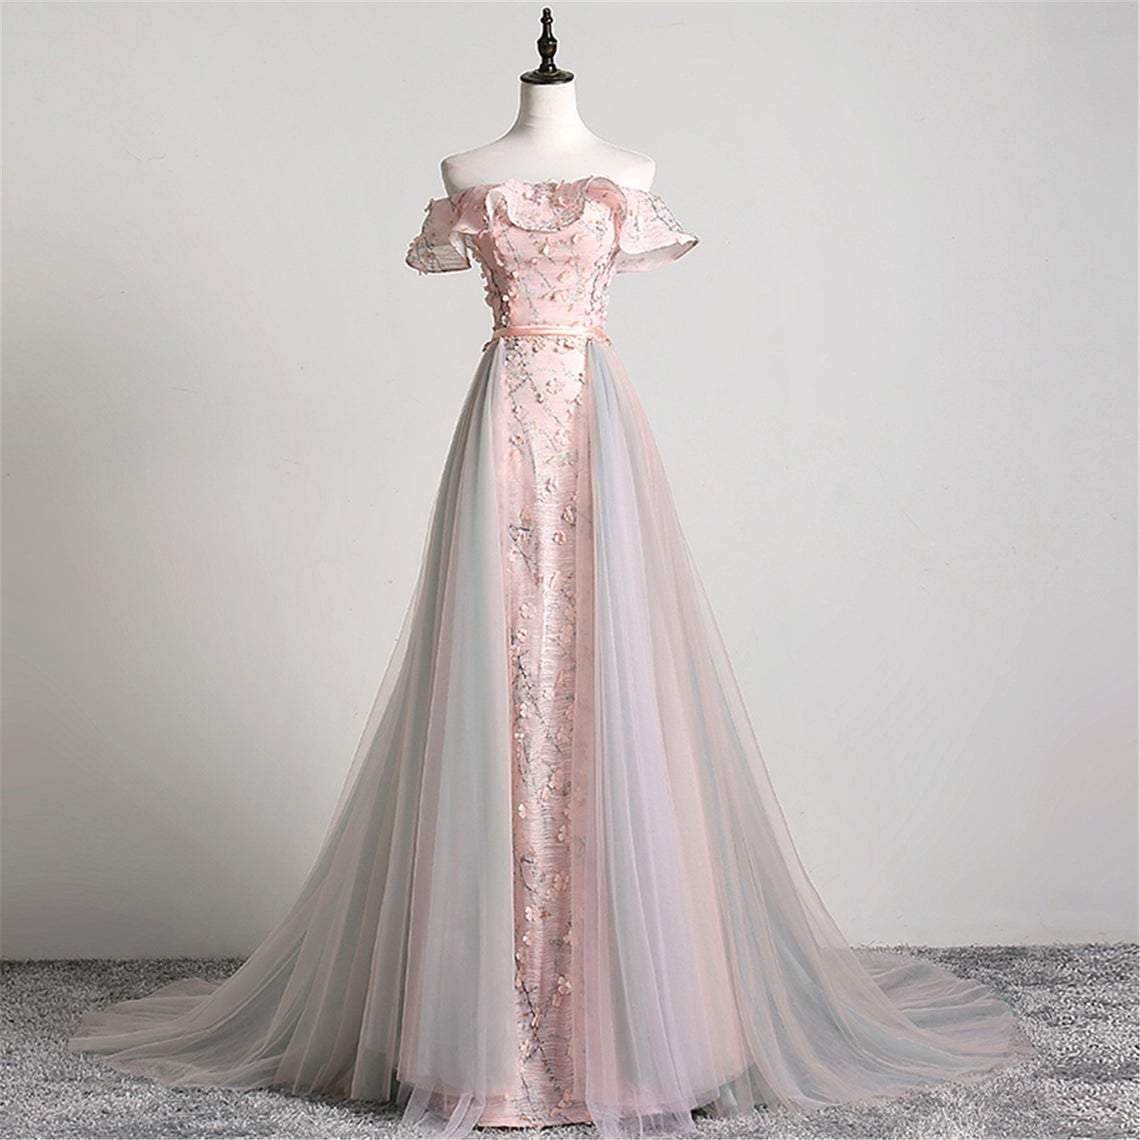 Elegant A-line Wedding Dress With Detachable Tulle Train Pink Ruffle Off-the-shoulder Bridal Dress A-line Prom Dress Pink Quinceanera